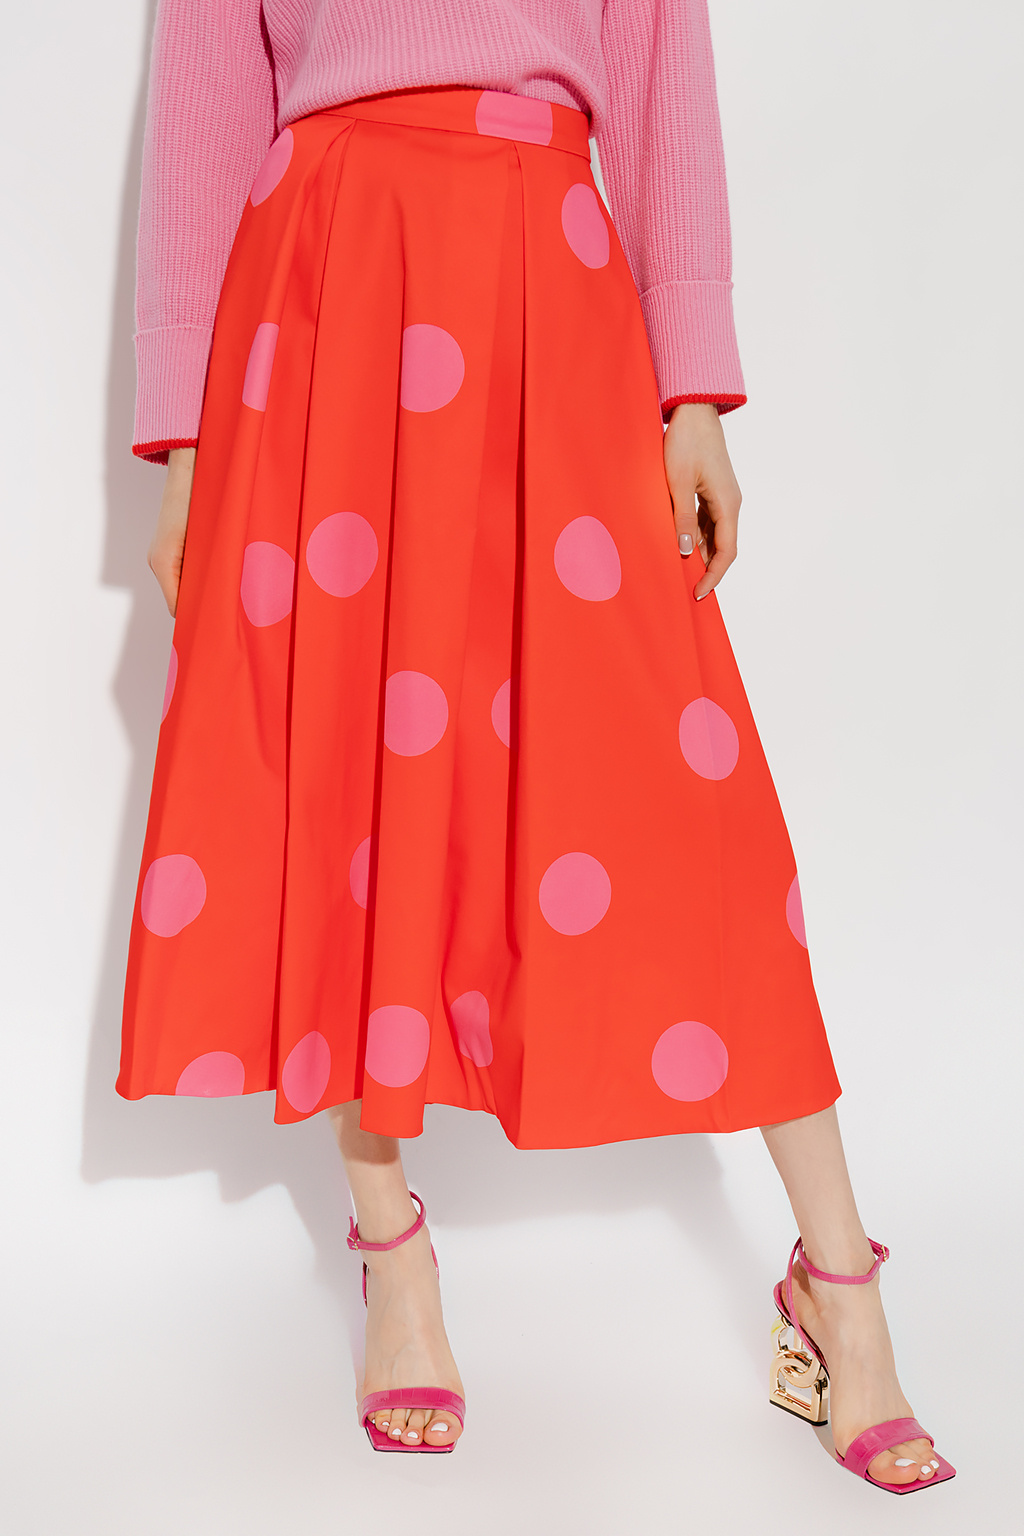 Kate Spade Download the updated version of the app